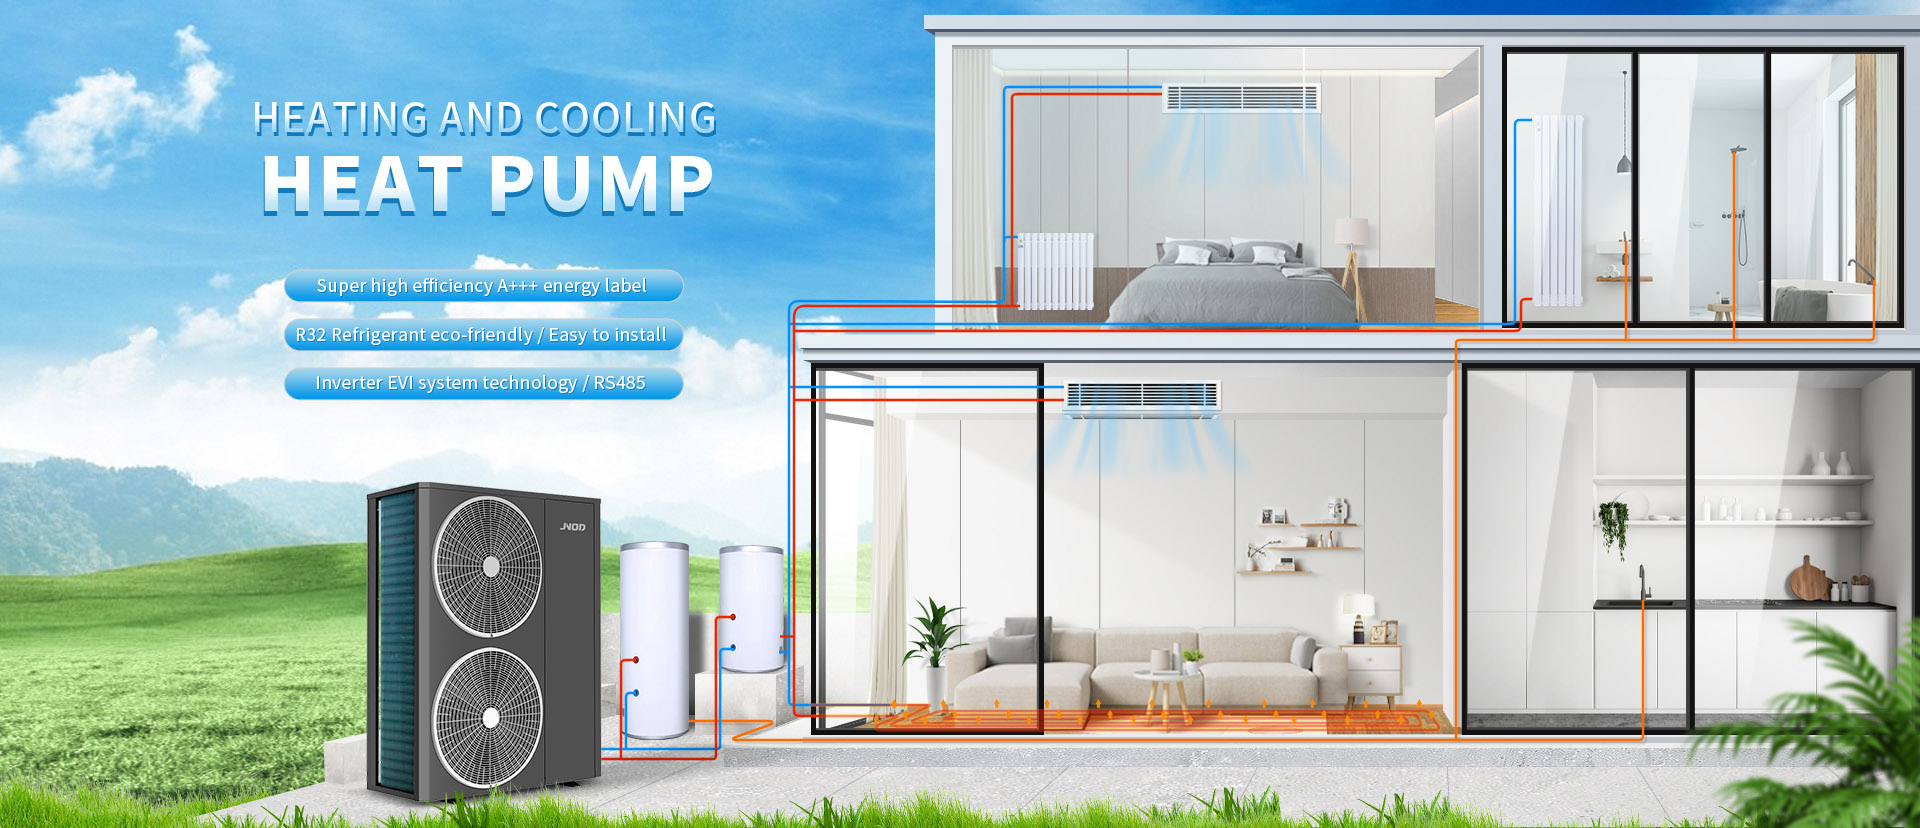 Air Cooled Wifi Heating And Cooling Heat Pump